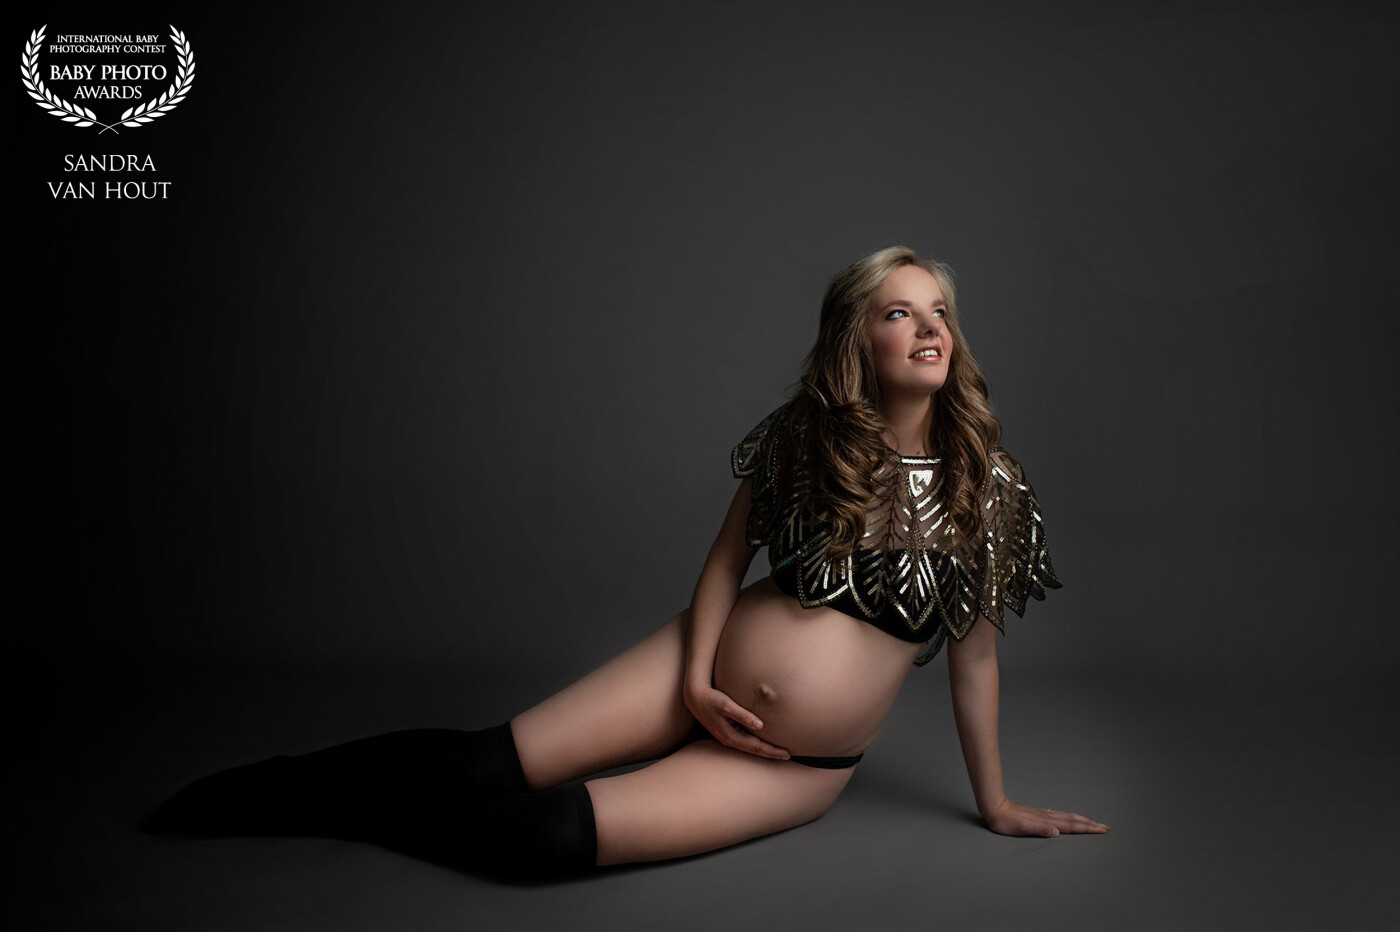 Maaike was so beautiful pregnant, she choose a session with make-up and hair. And i think thats the best way to do you’re maternity session. It gives you so much confident that you shine evenmore.